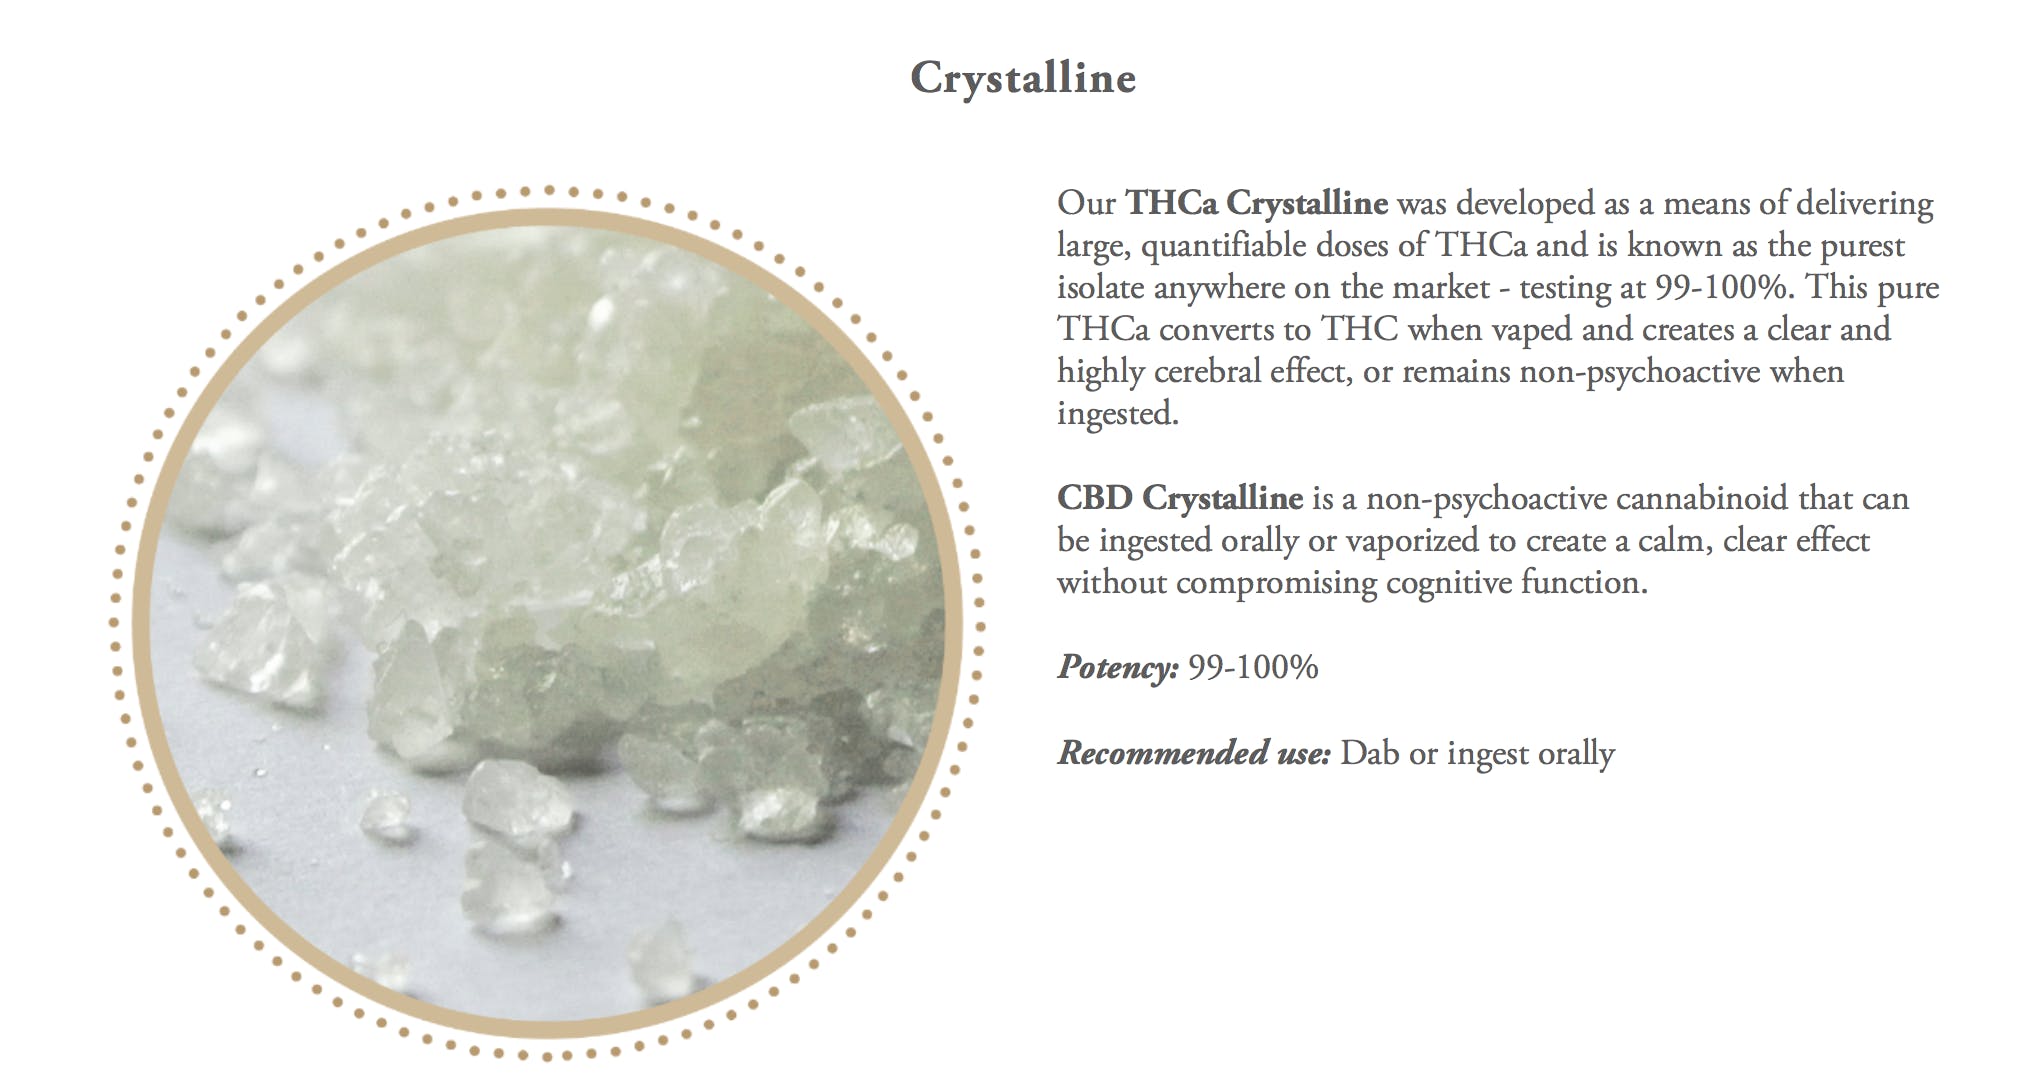 concentrate-thc-a-crystalline-2c-0-5g